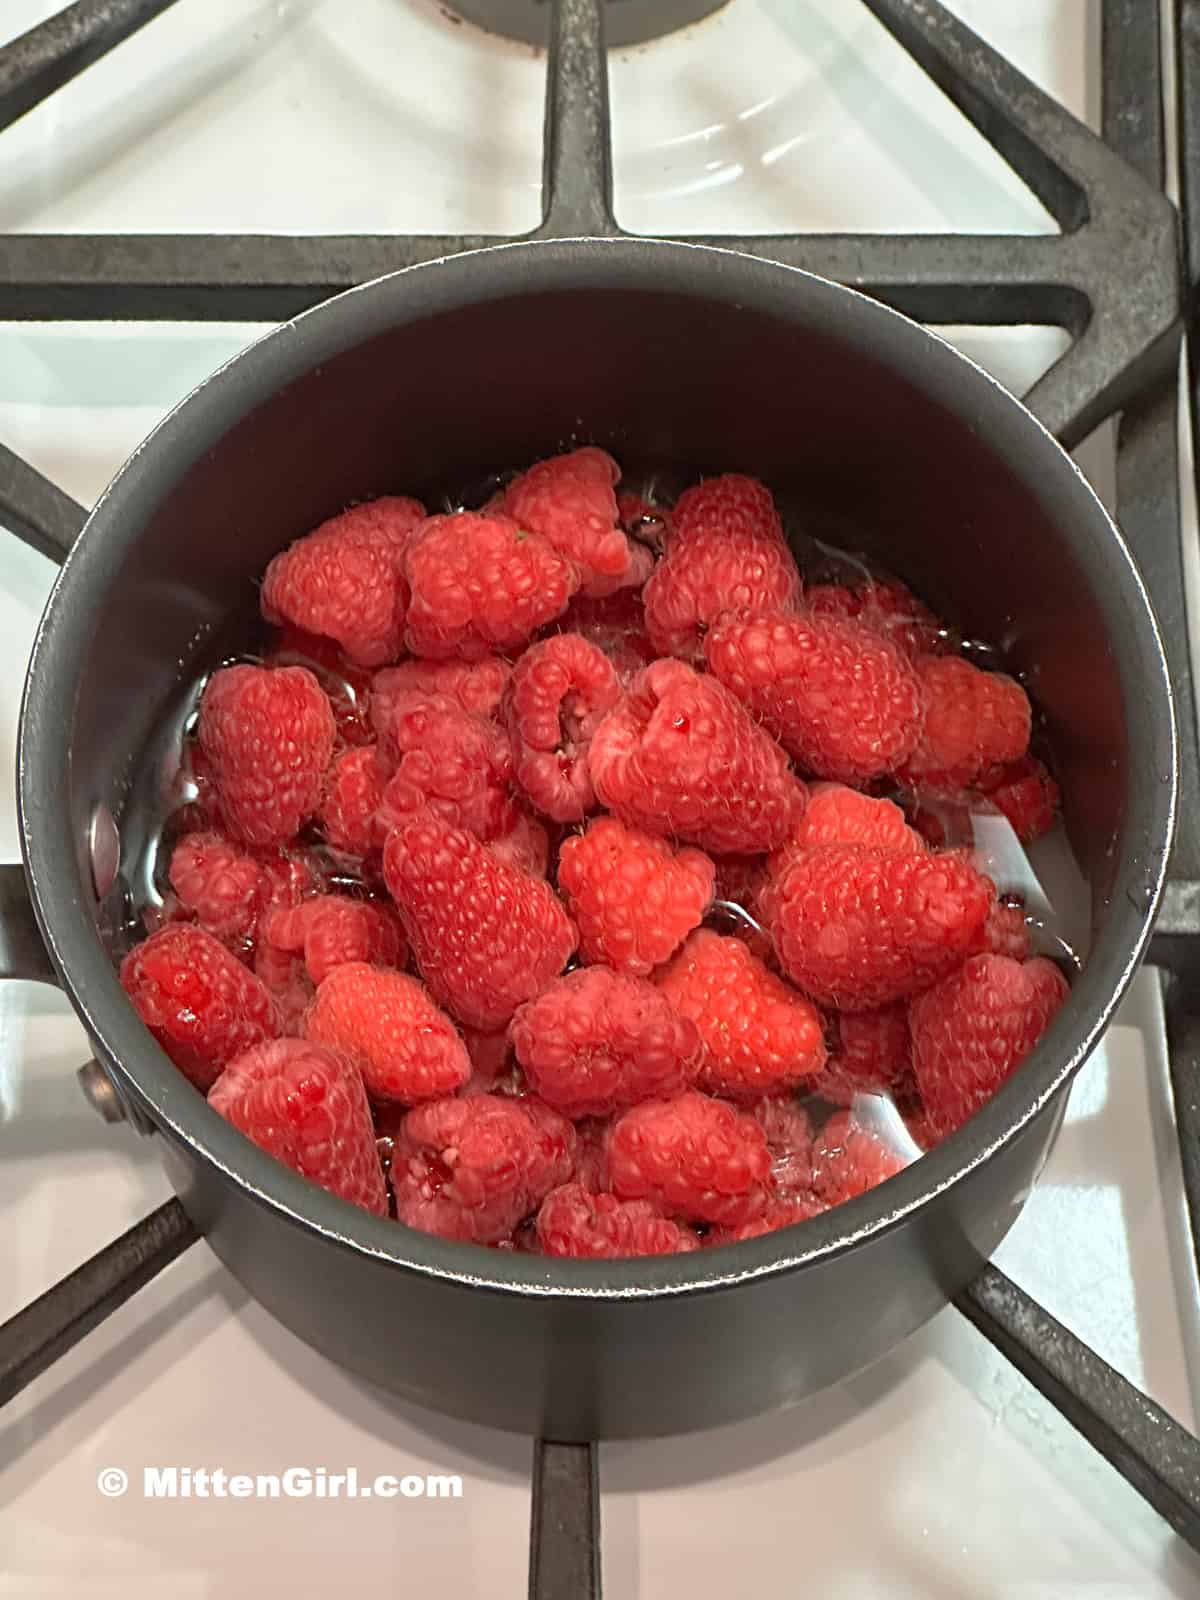 Raspberries in a small pot of sugar and water.